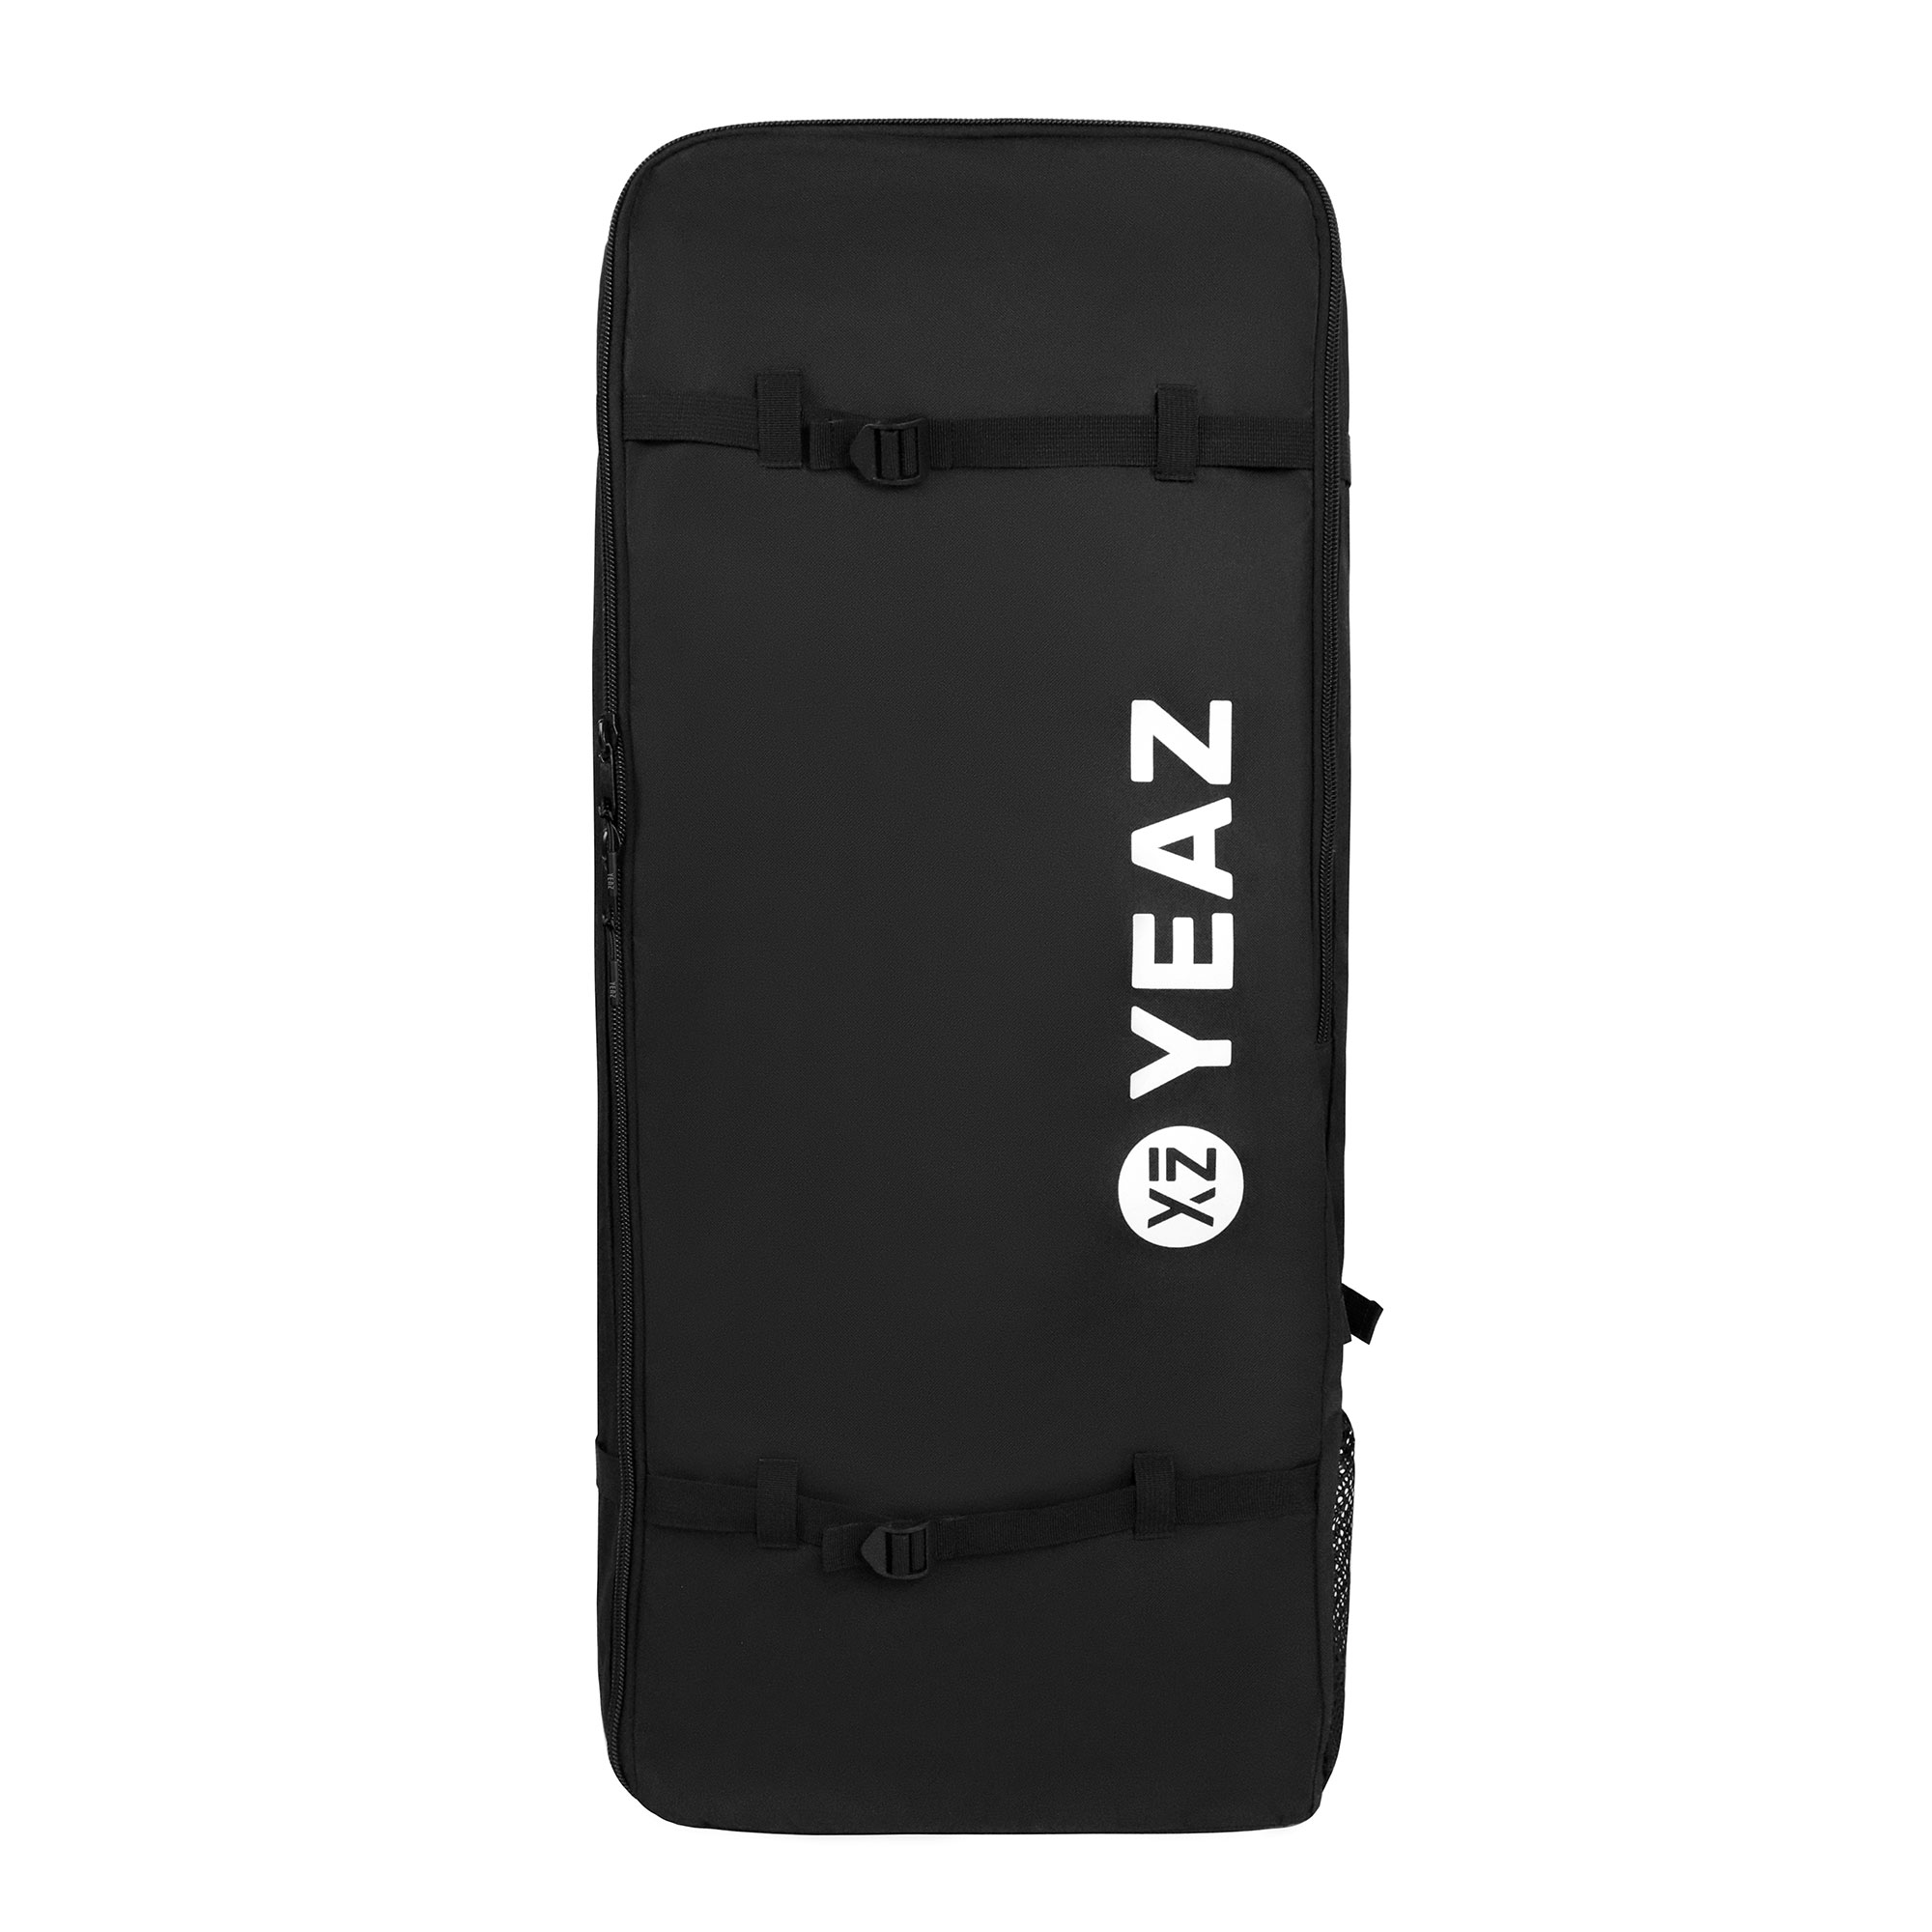 YEAZ KIT BAMBOO black SUP Acessories, eclipse